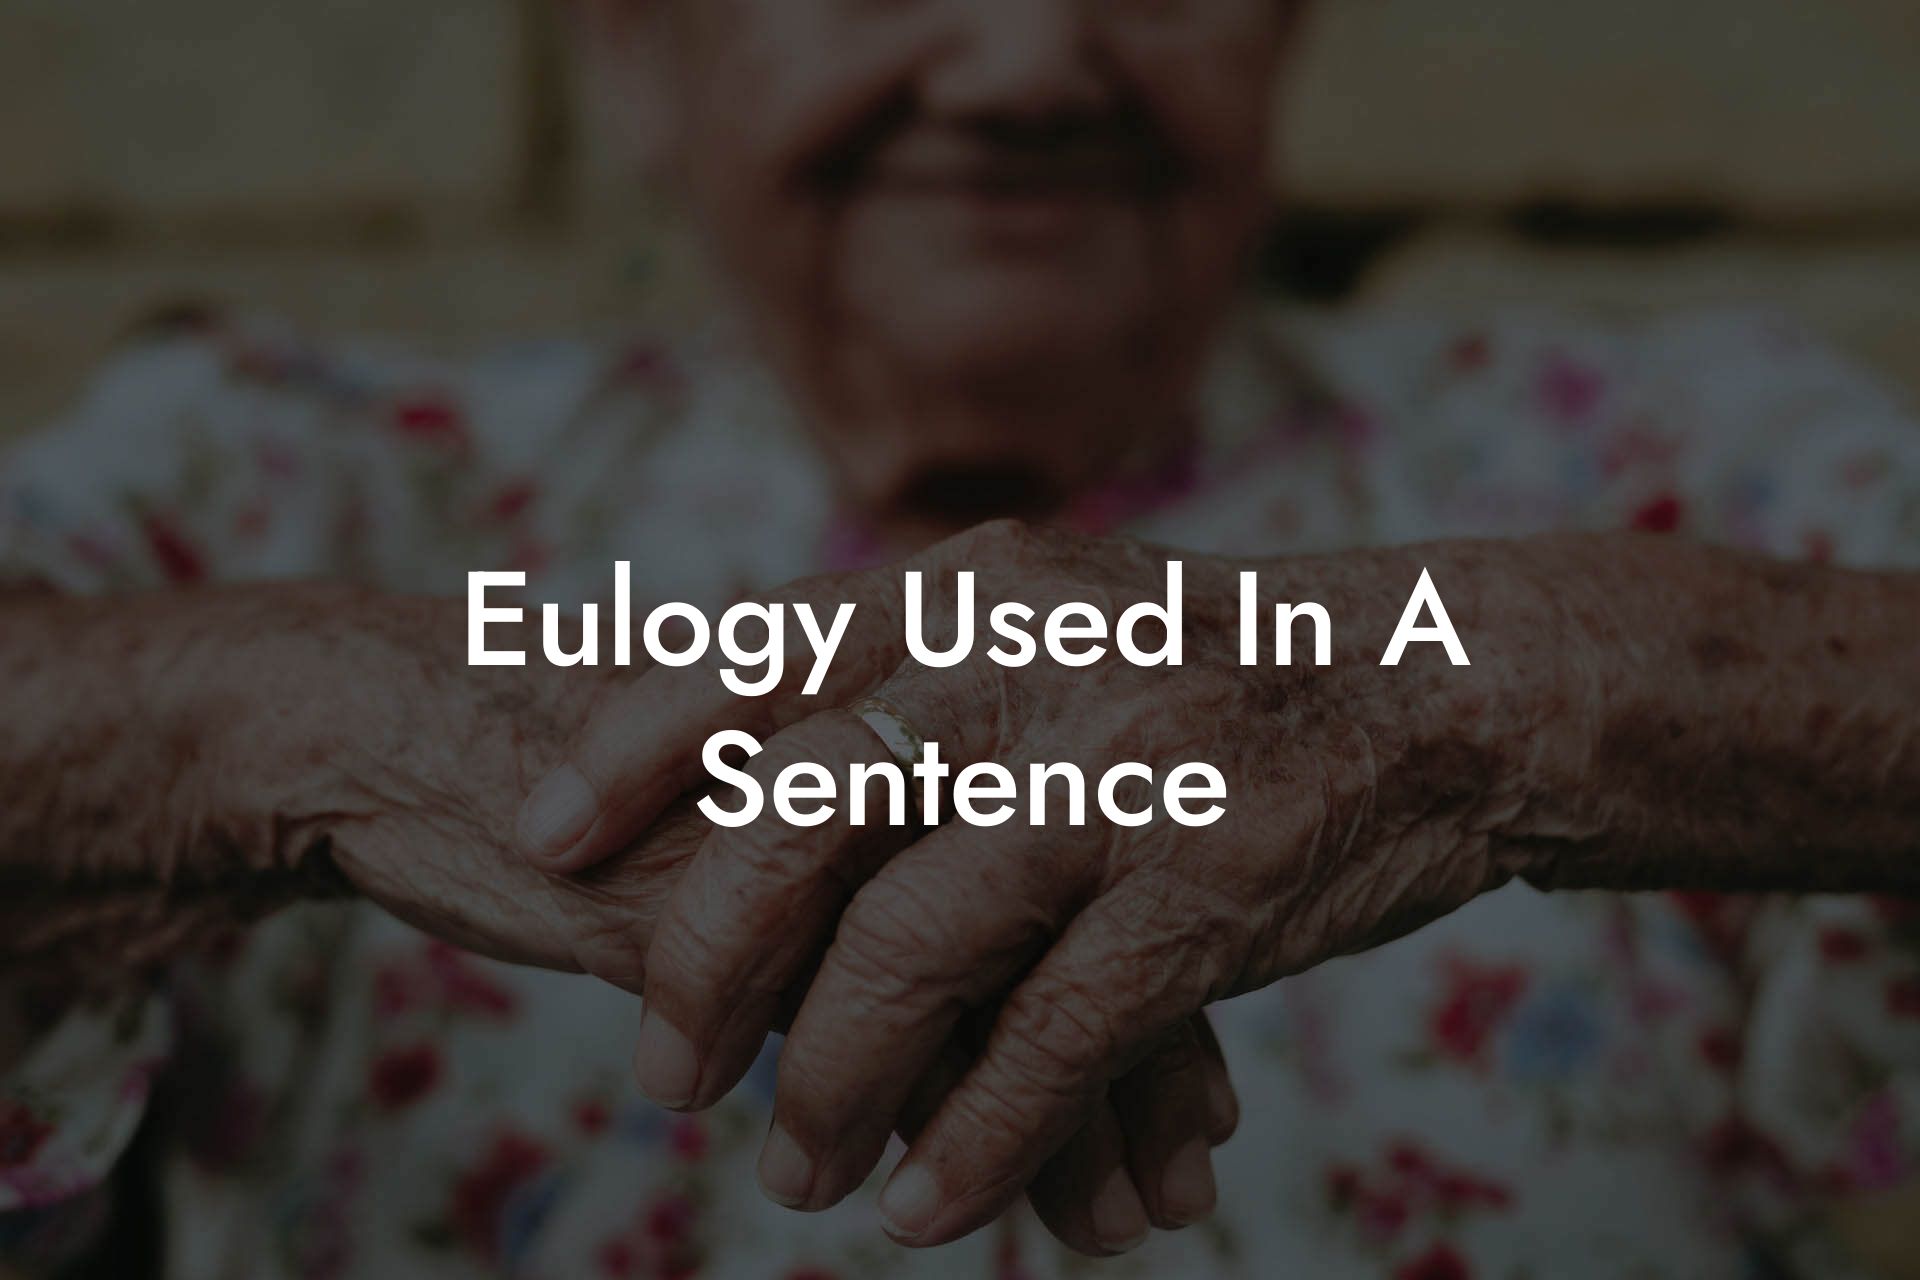 Eulogy Used In A Sentence